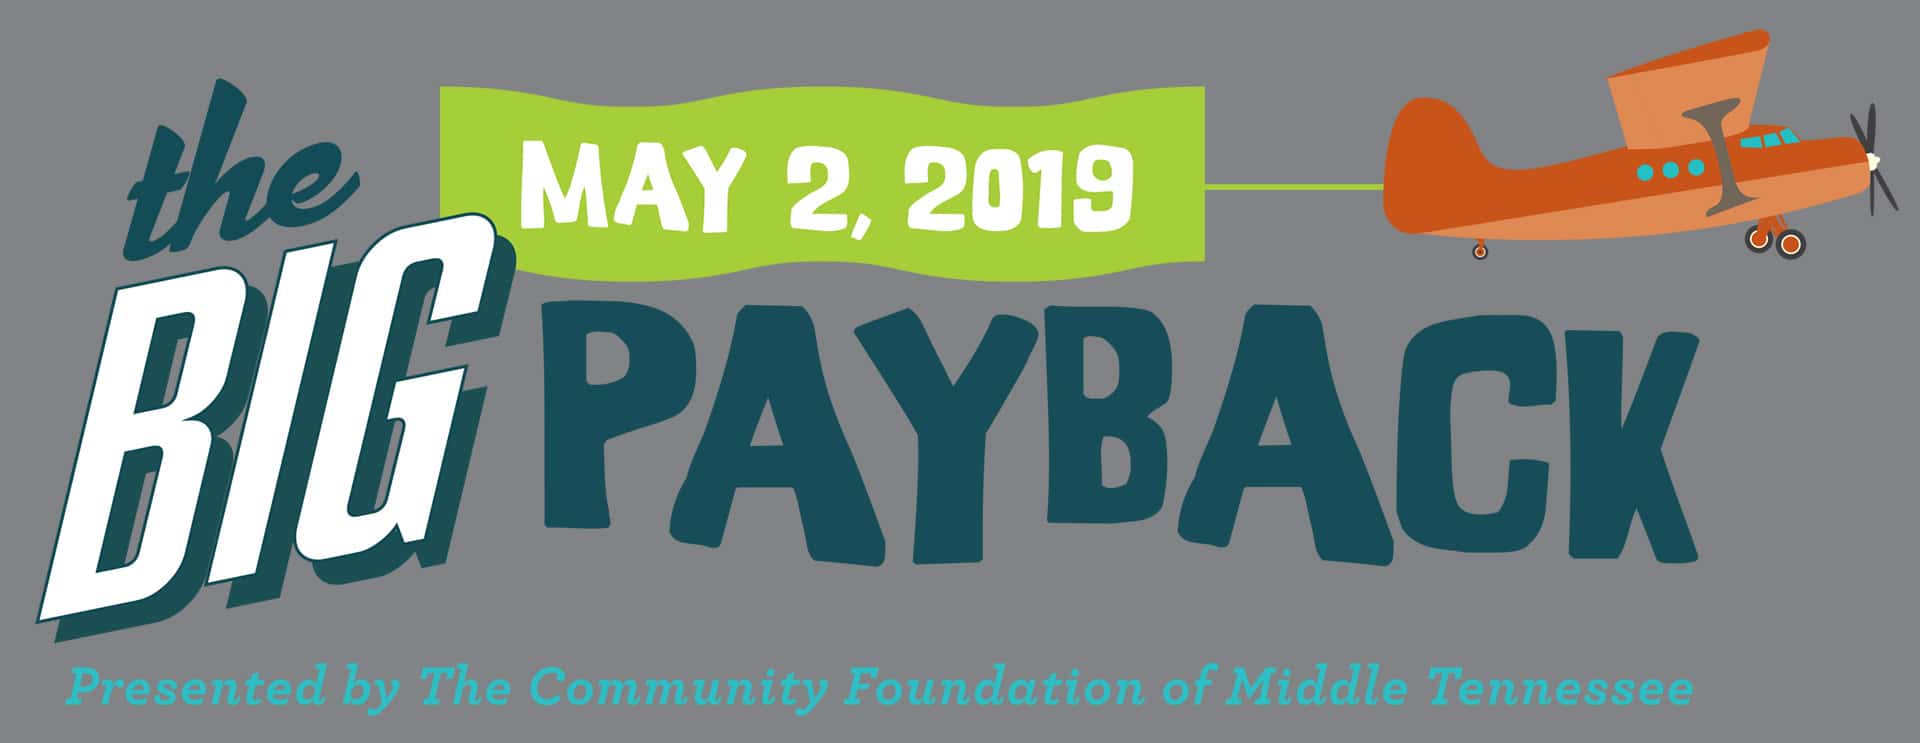 The Big Payback 2019